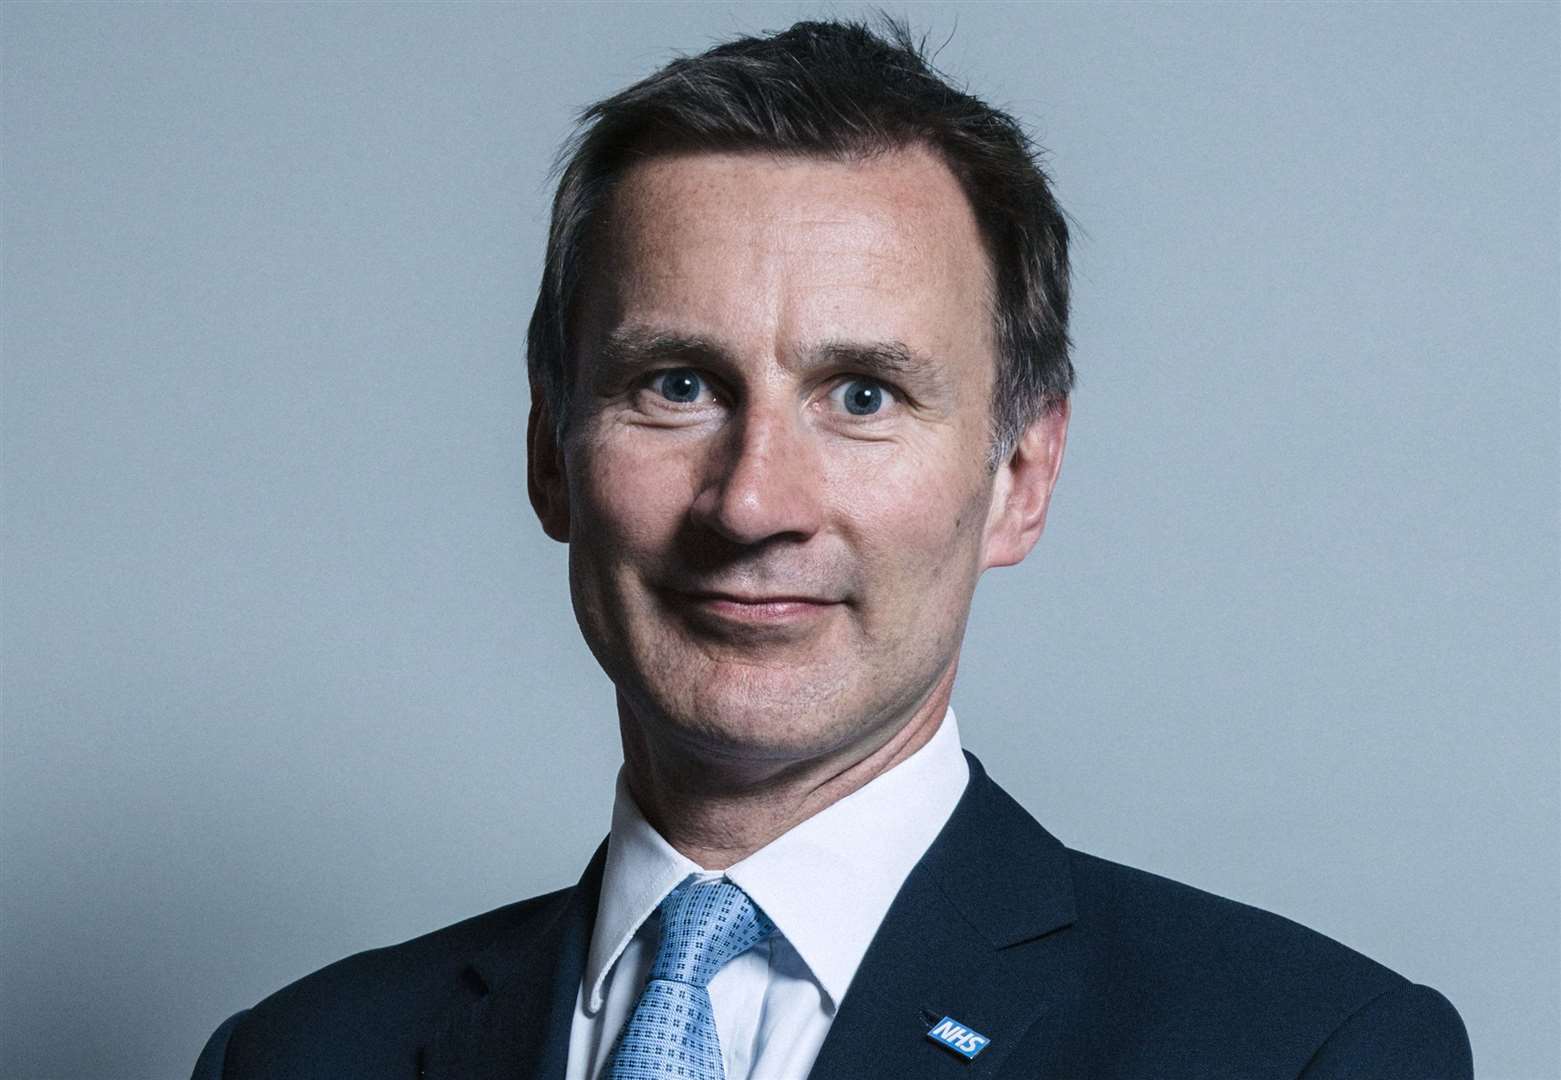 Chancellor Jeremy Hunt will deliver the Autumn Statement next week